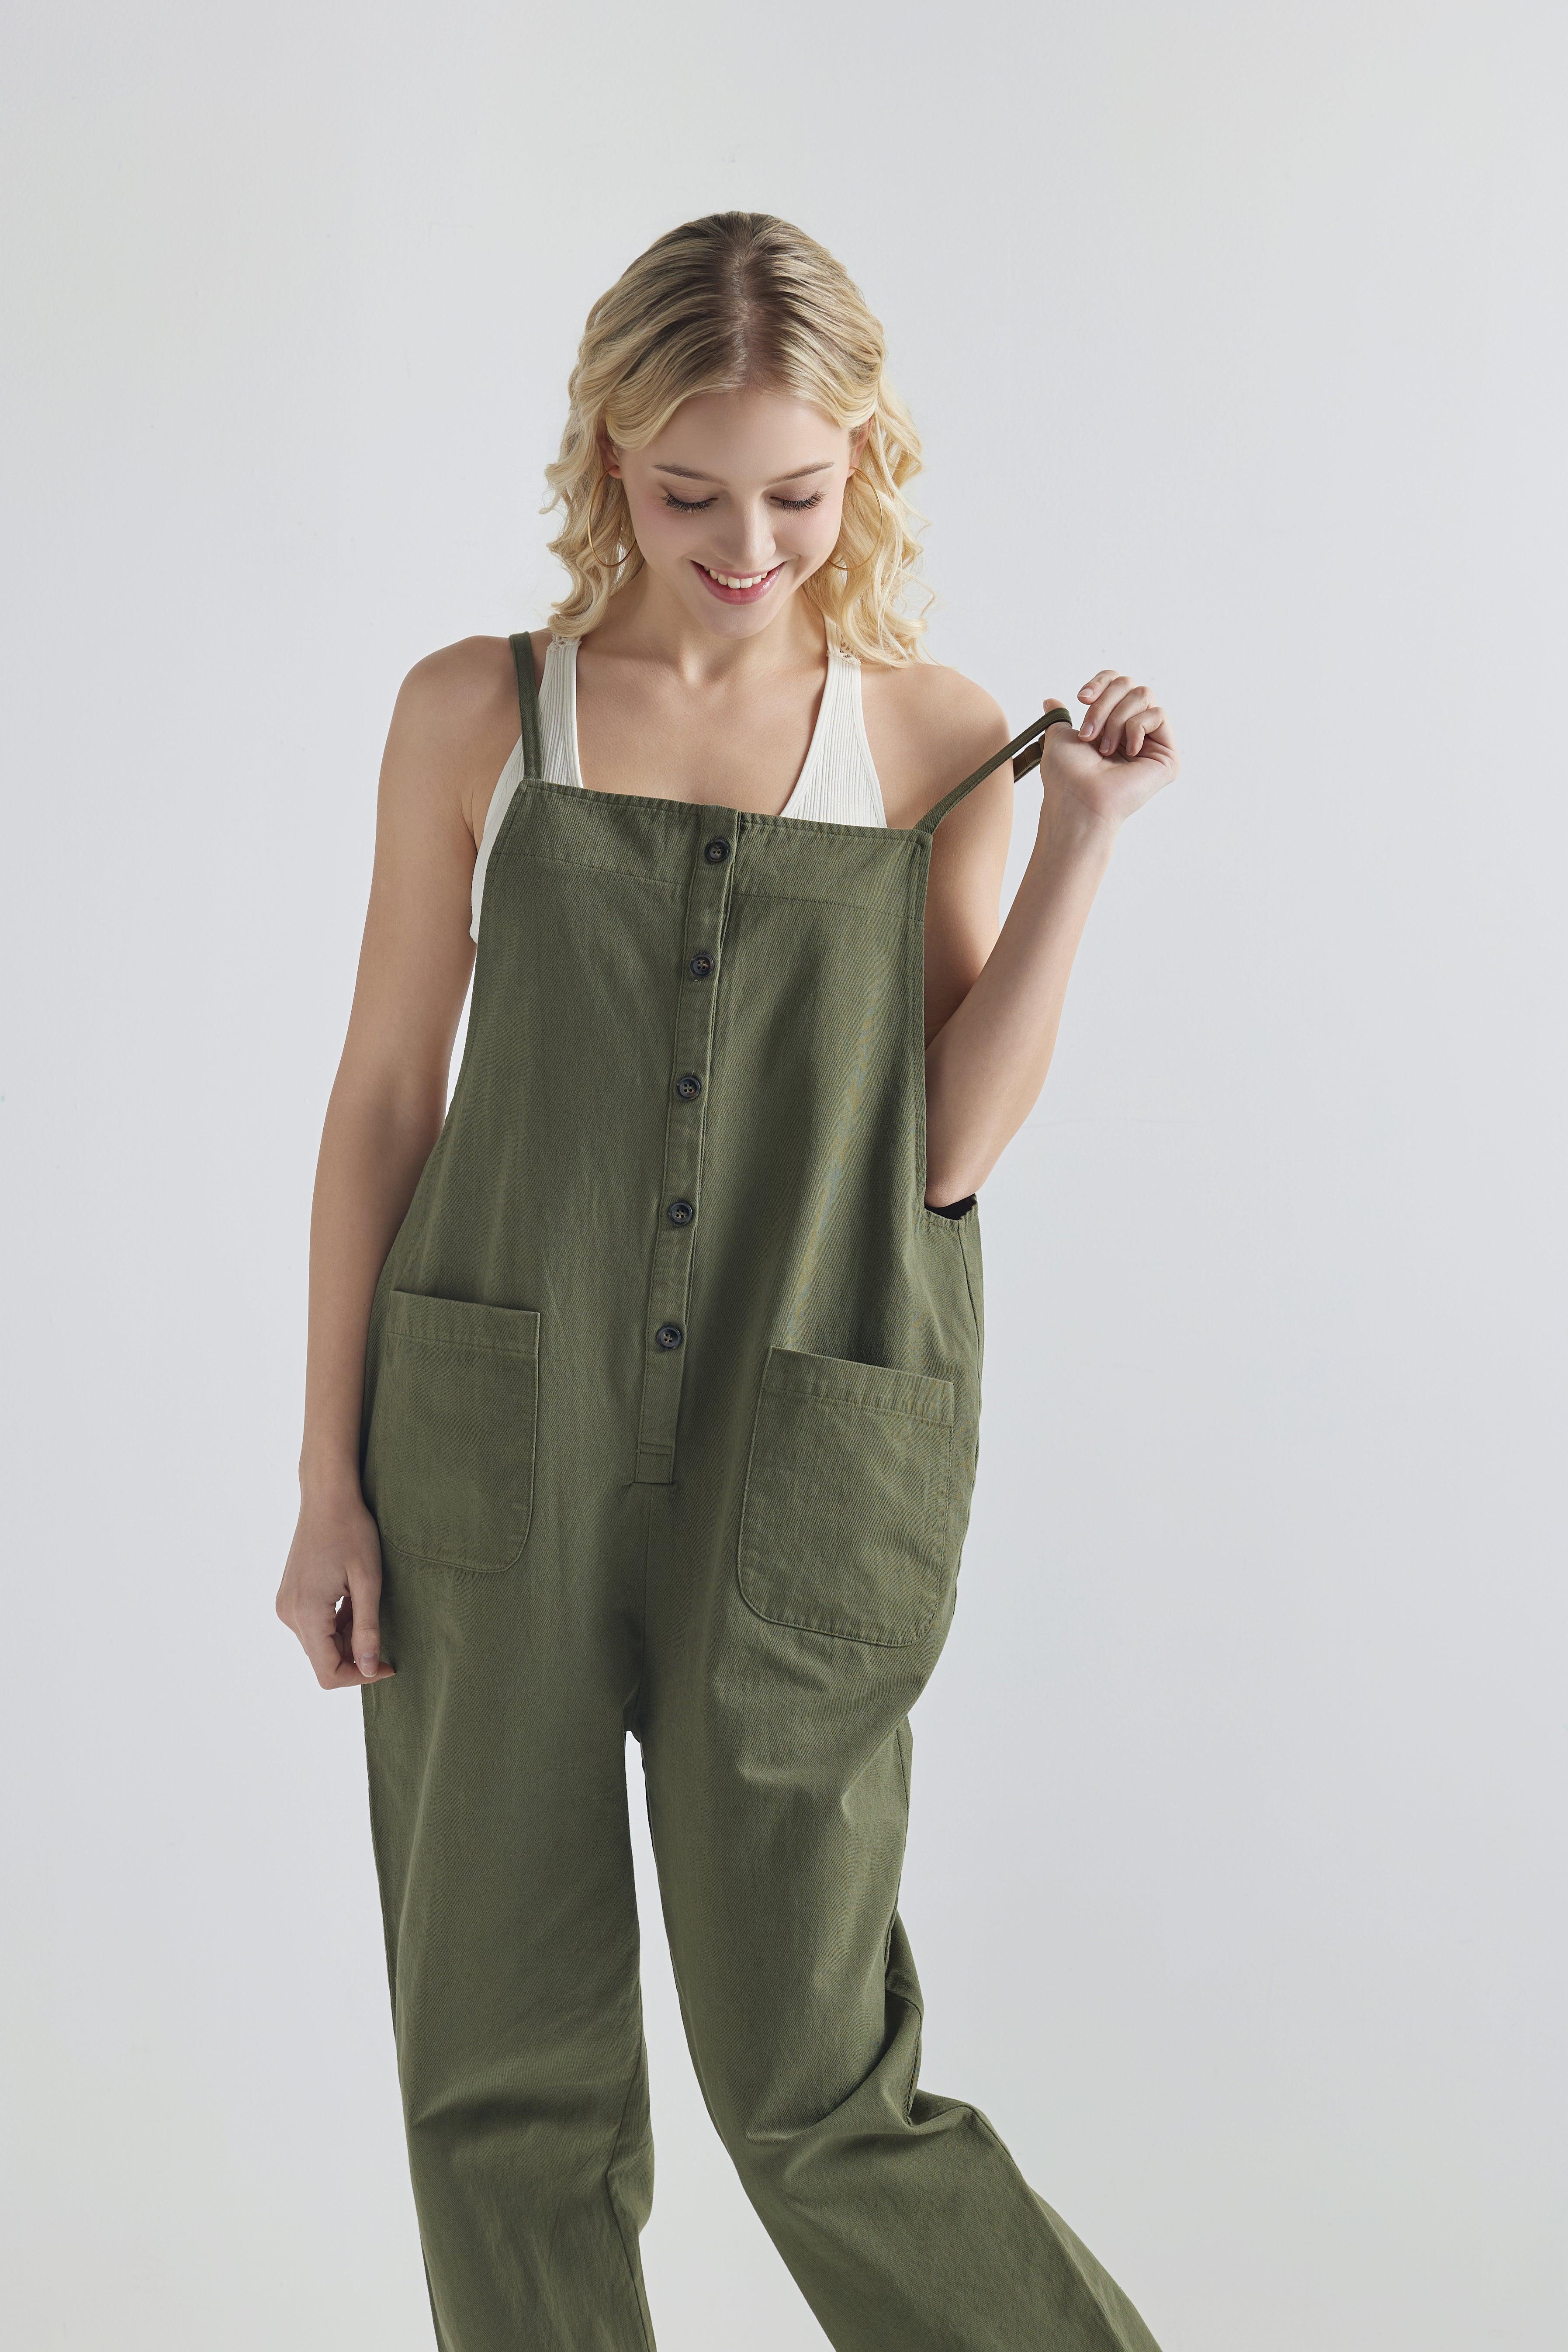 100% cotton Button Down Sleeveless Overalls Jumpsuit with Pockets - Olive - noflik